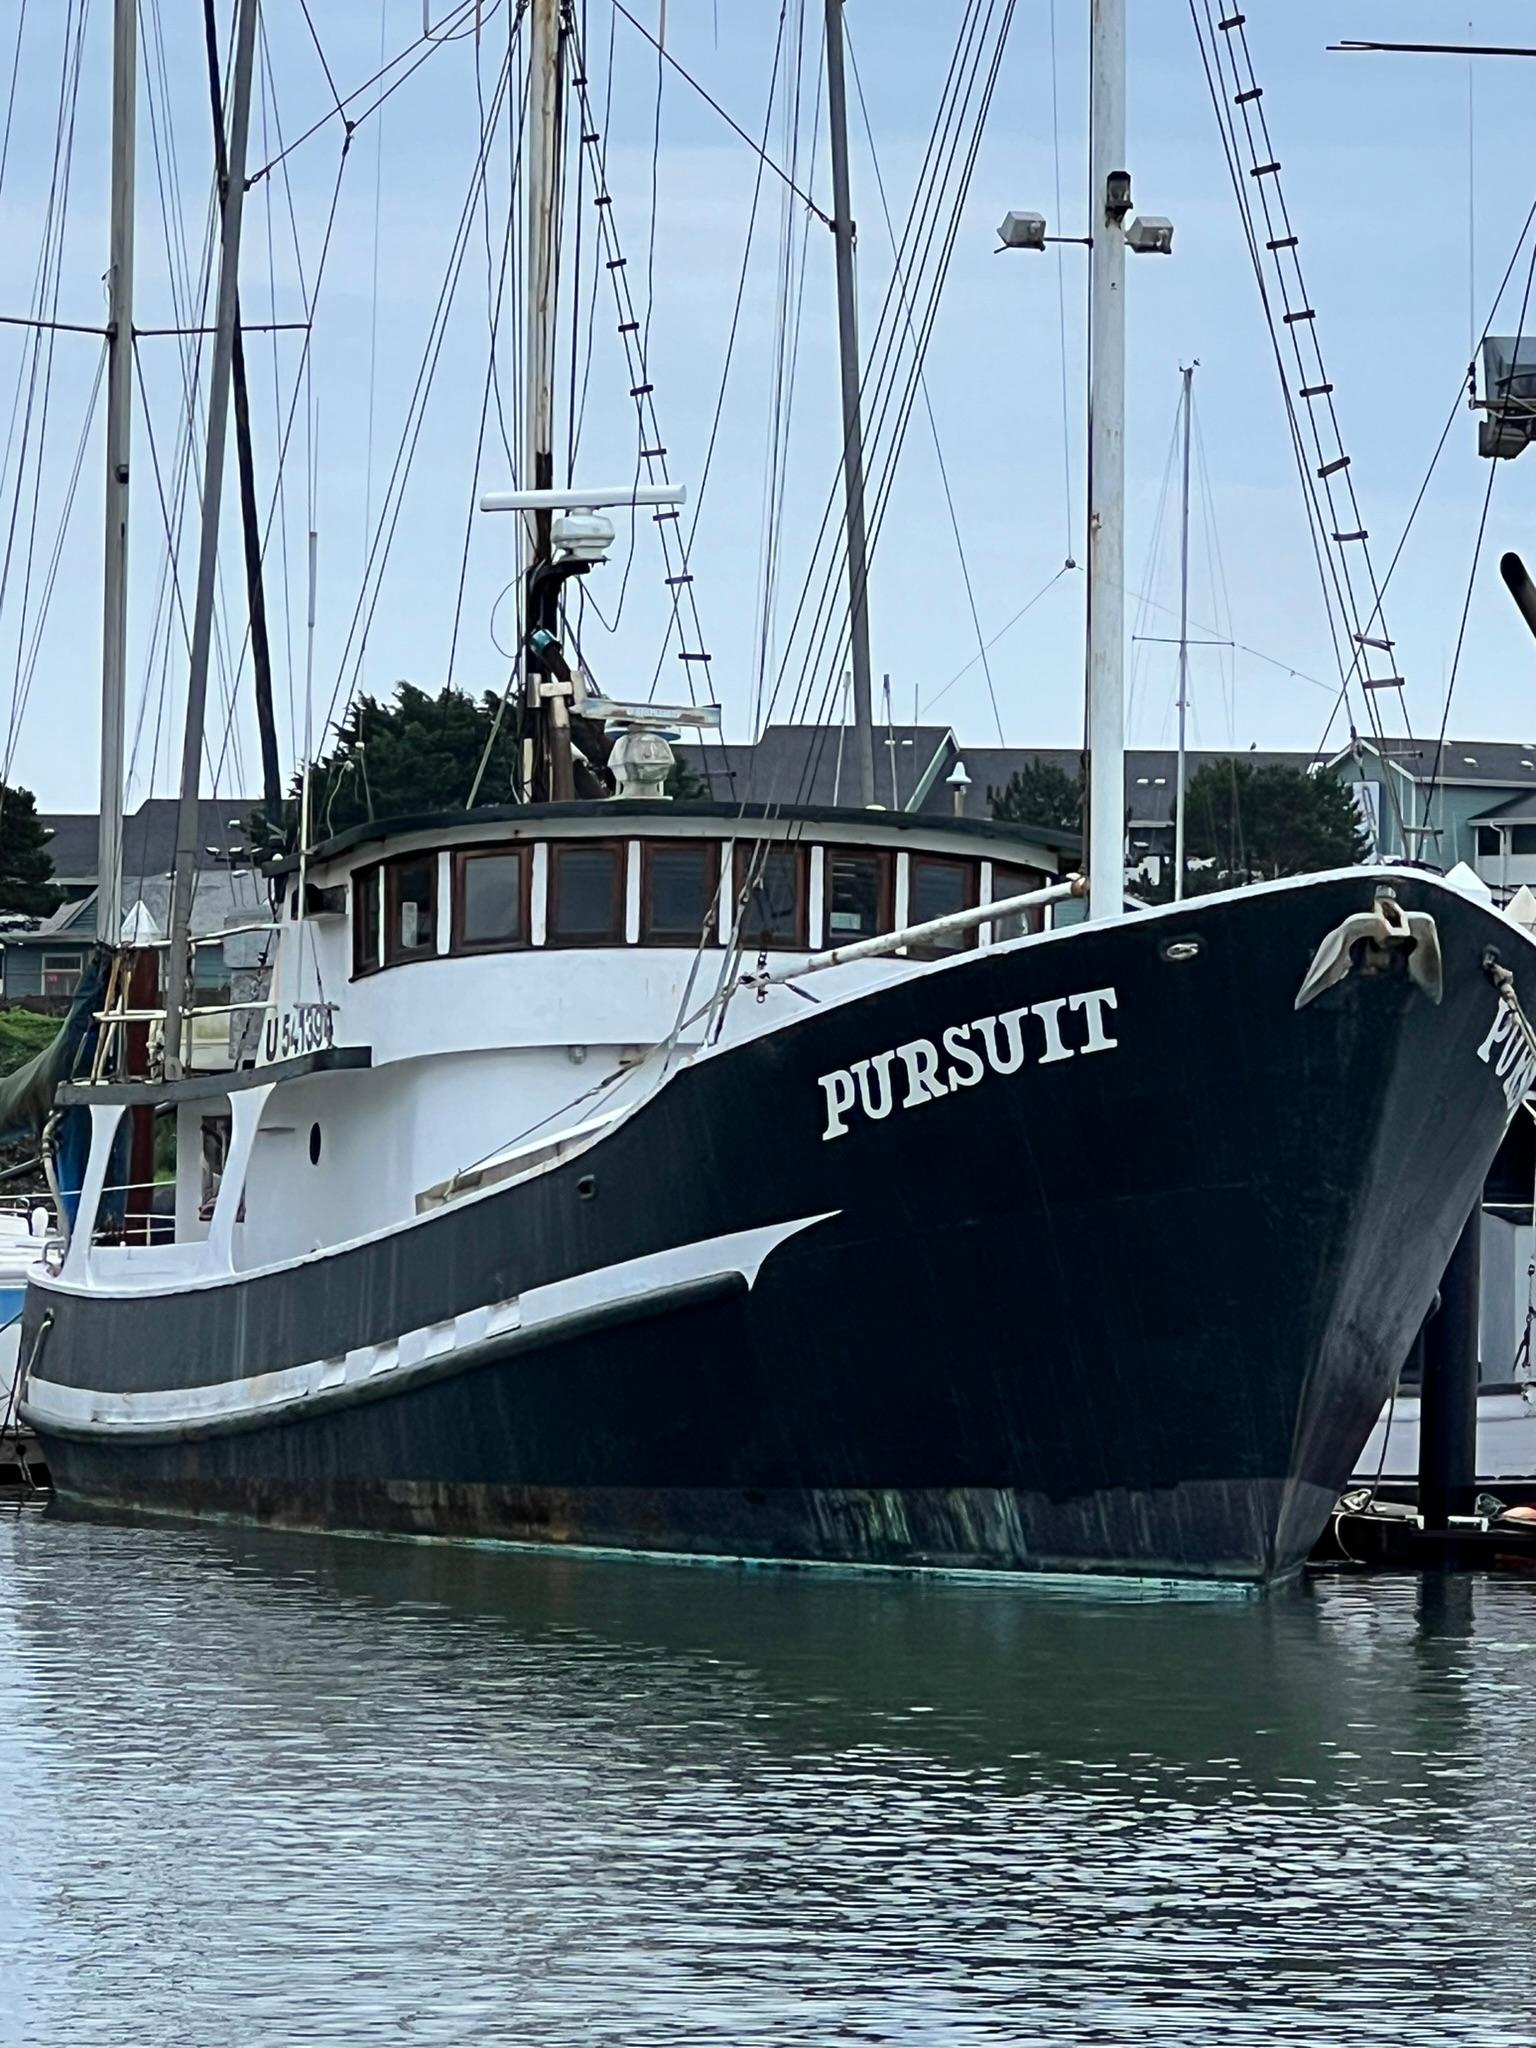 F/v Pursuit Yacht for Sale  54 Jones-goodell Yachts Brookings, OR